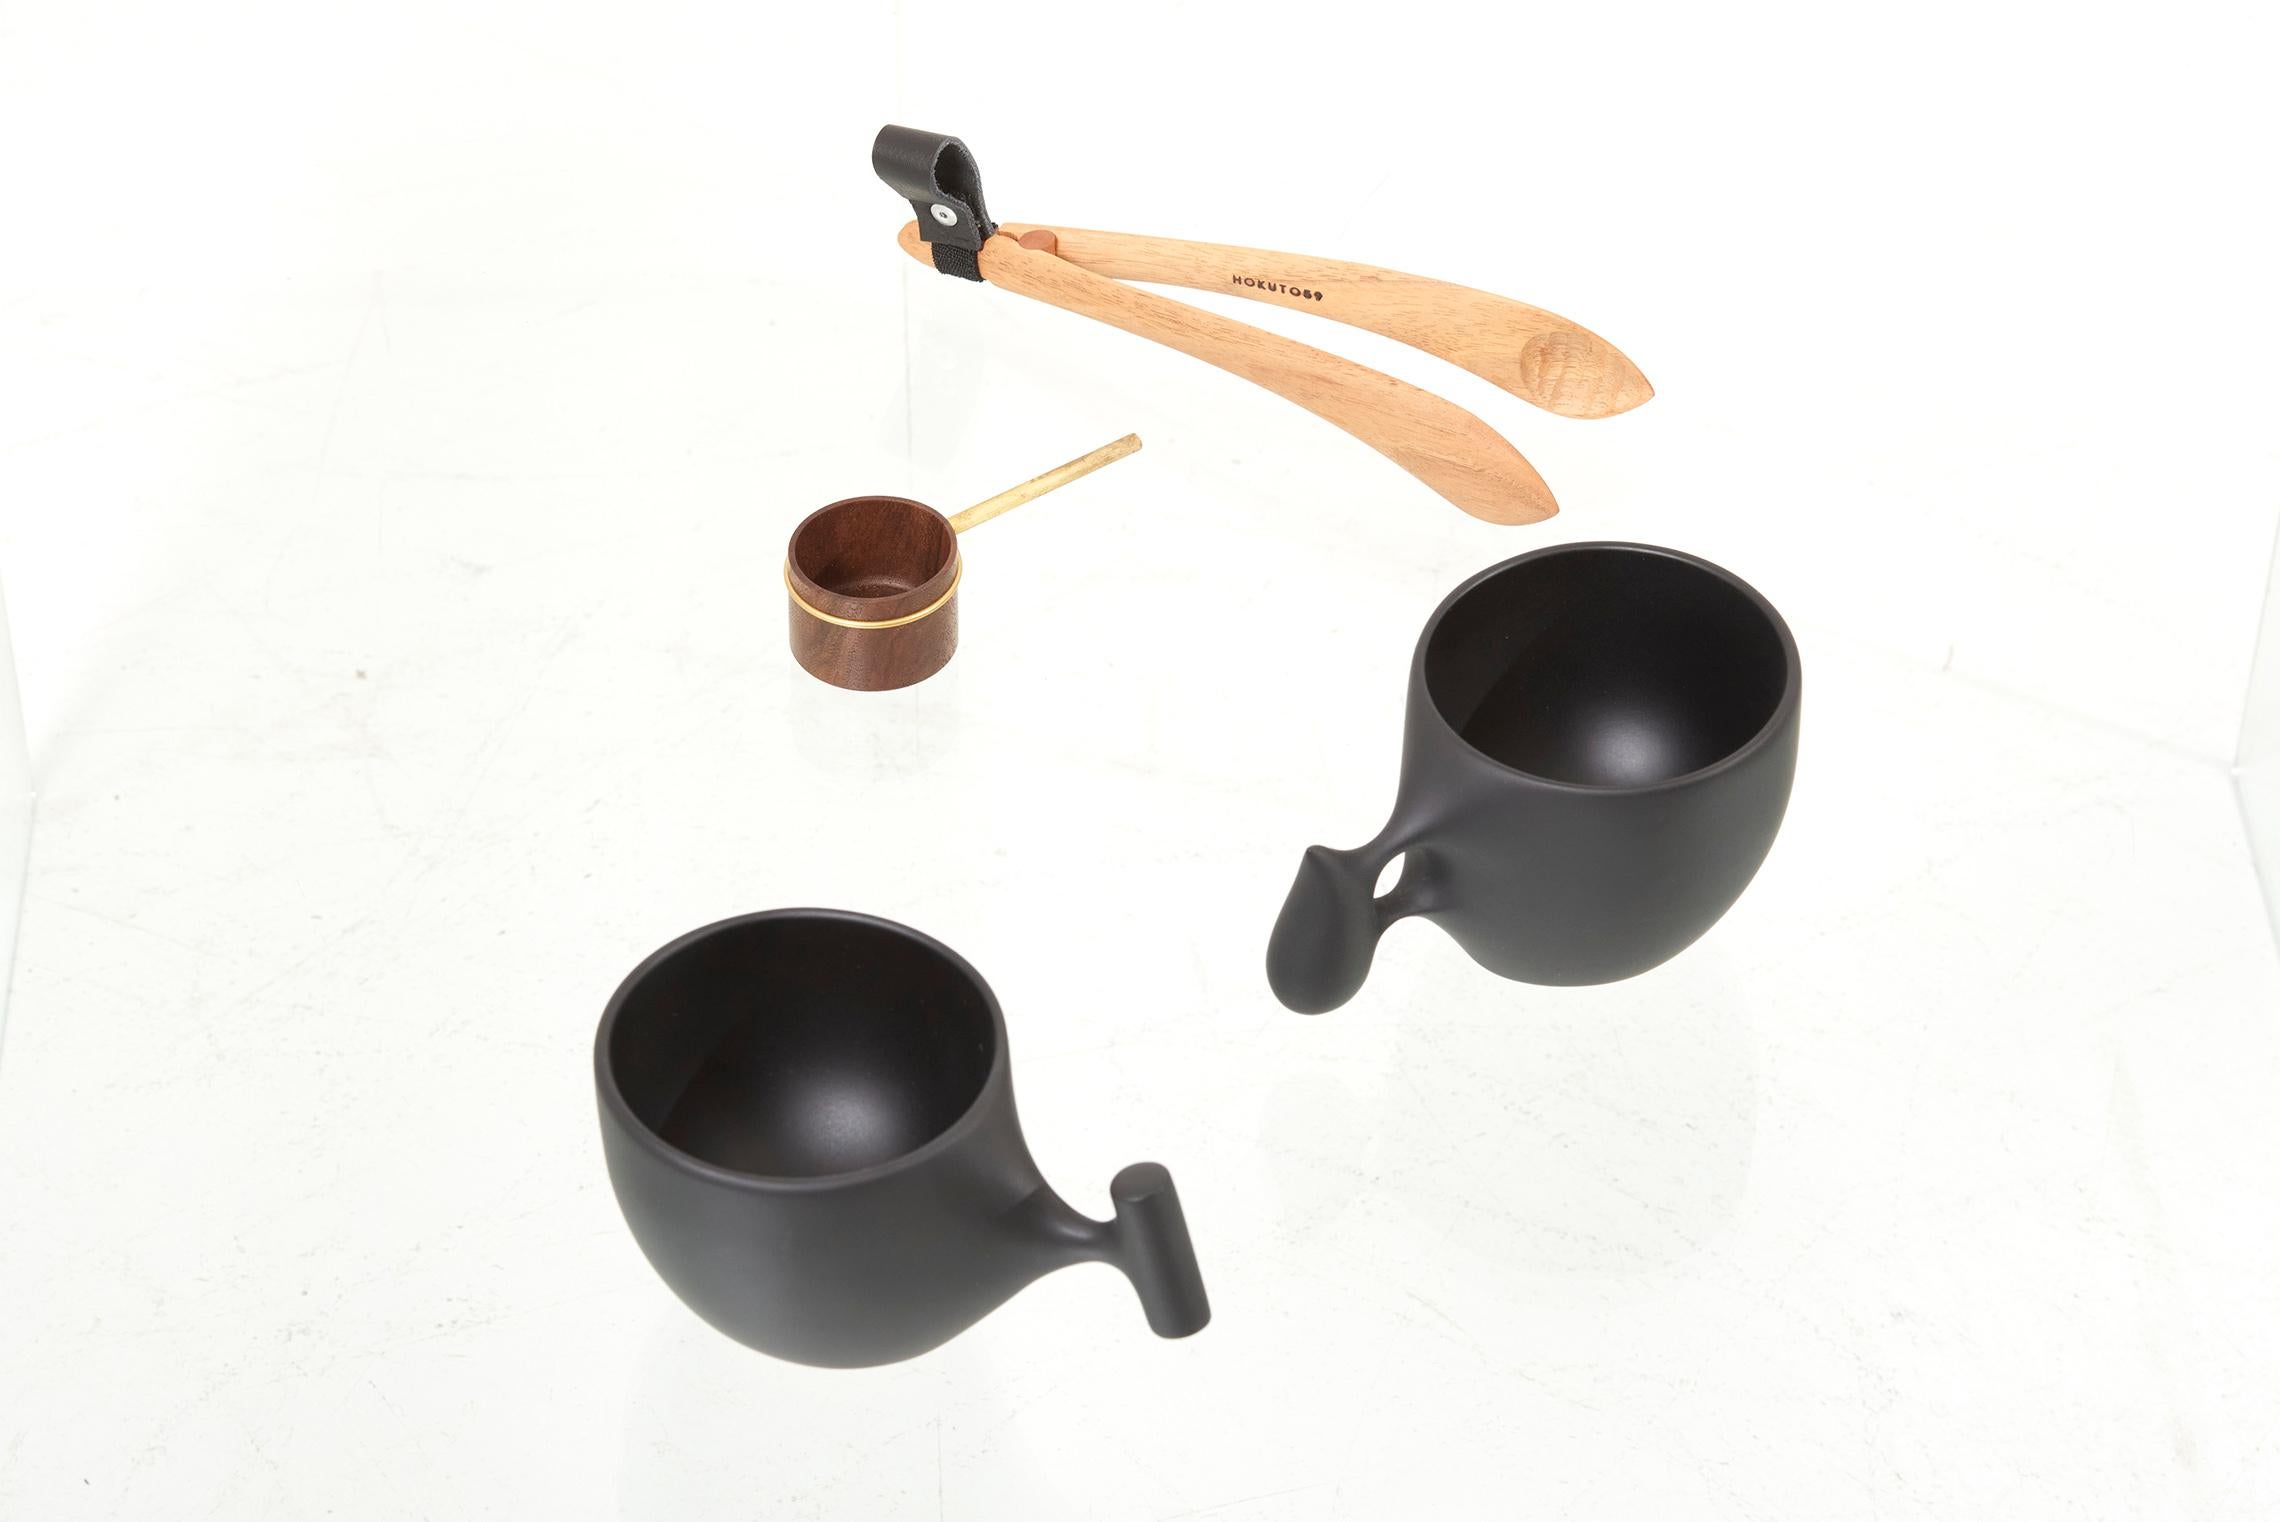 This set contains a selection of 4 hand-crafted kitchenware items: Two coffee mugs, one coffee scoop and one tong, all hand-crafted by Japanese designer Hokuto Sekine in 2021. The measurements given apply to the coffee mug, the coffee scoop measures